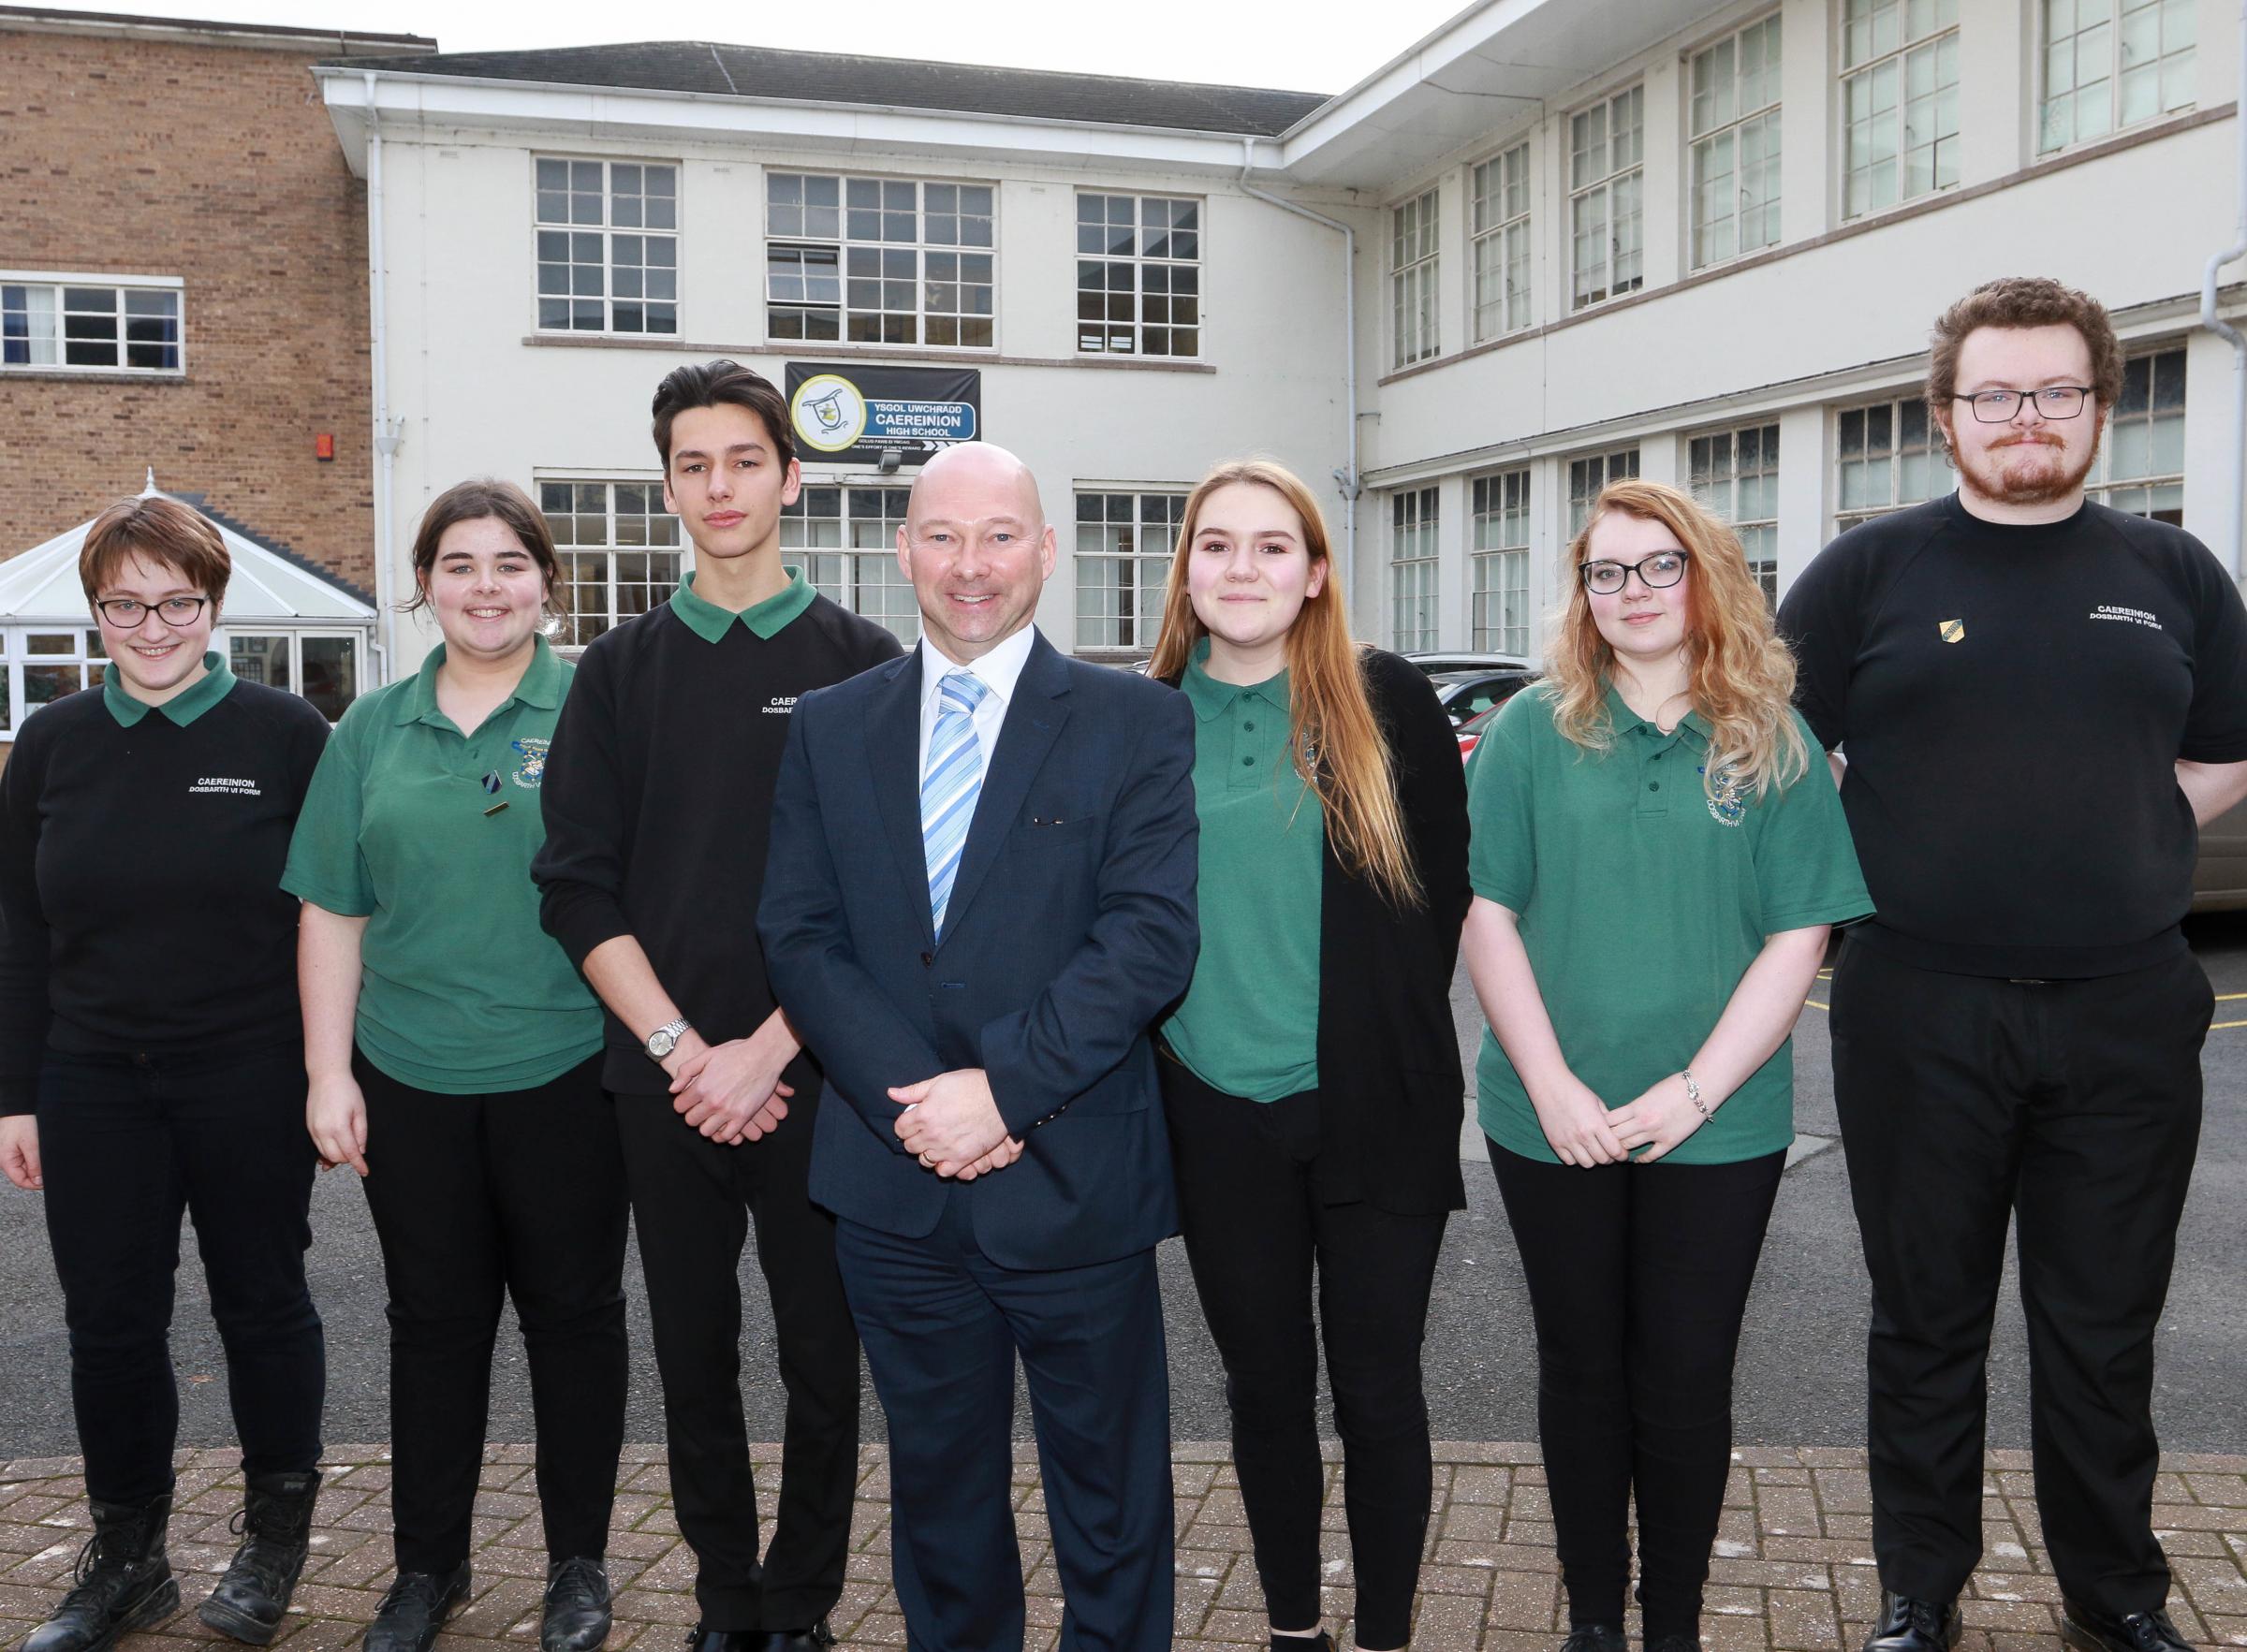 Caereinion High School new head teacher Mr Phil Jones..Pictured from left to right, Isobell Arrowsmith, Frances Andew, Dylan Bridgen (Head Boy) Phil Jones (Head Teacher) Agatha Titley (Head Girl) Laura Bebb and Ieuan Lowther..Pictured by Phil